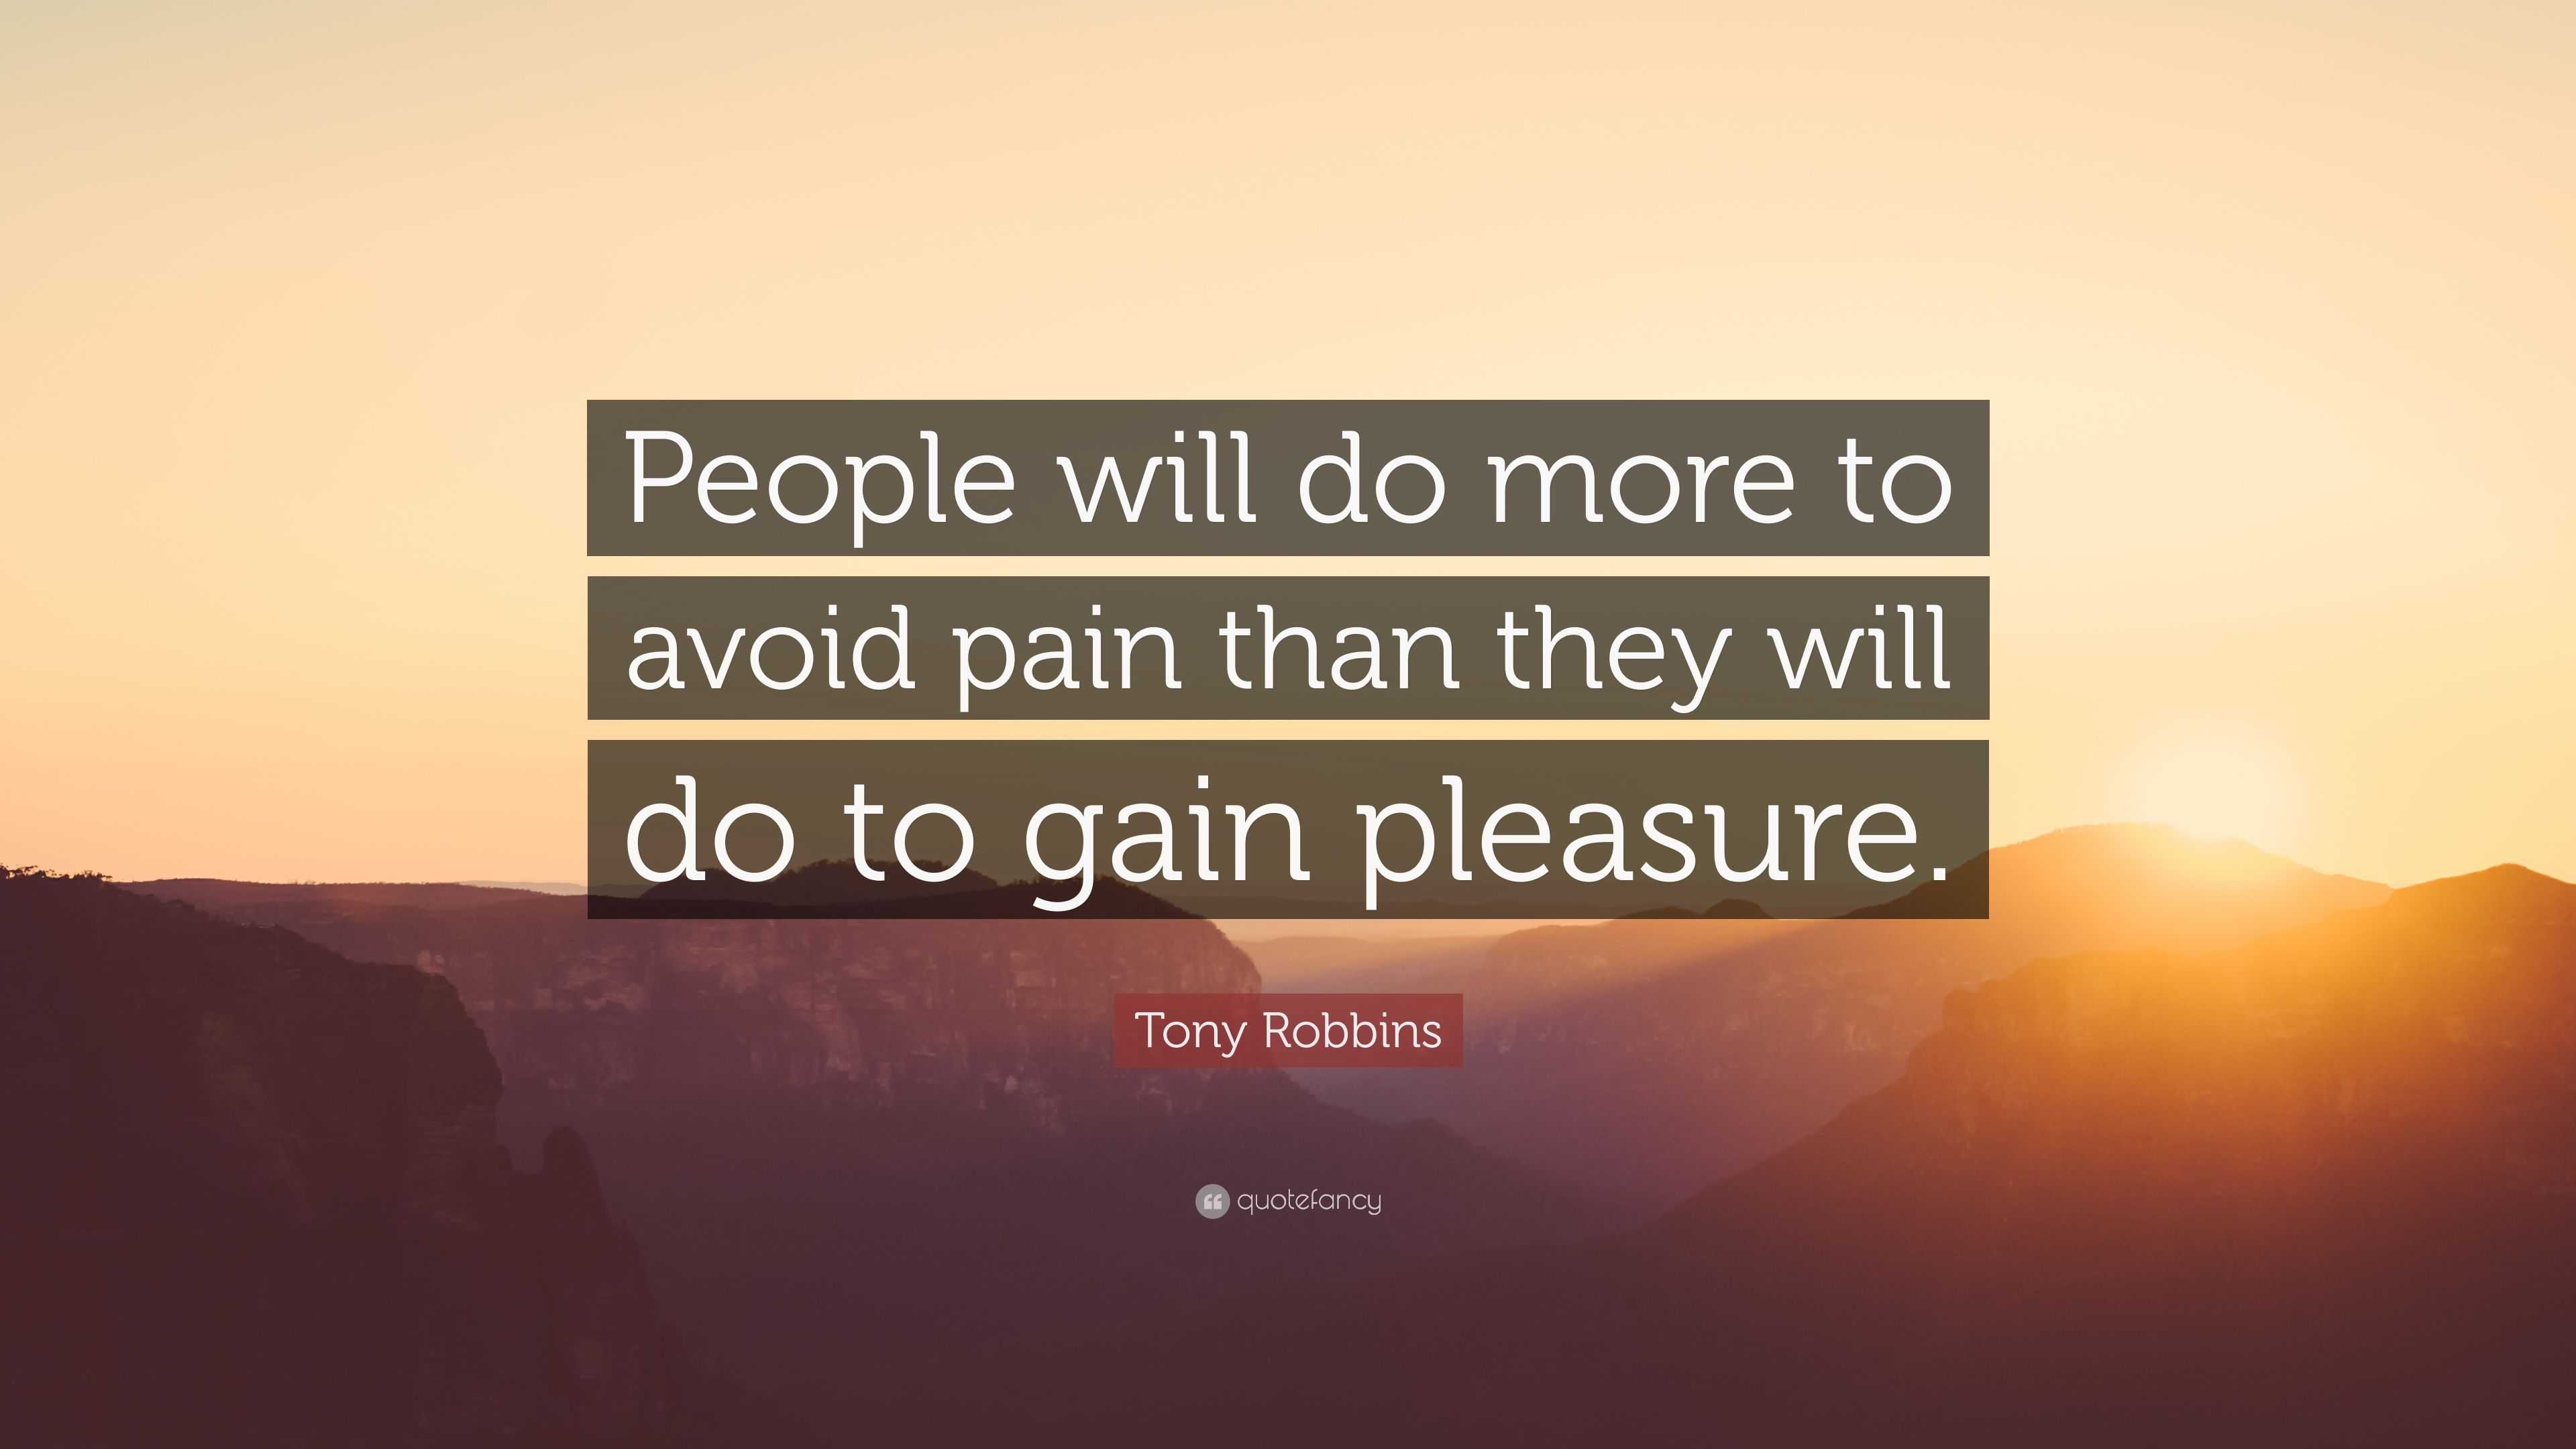 Tony Robbins Quote: “People will do more to avoid pain than they will